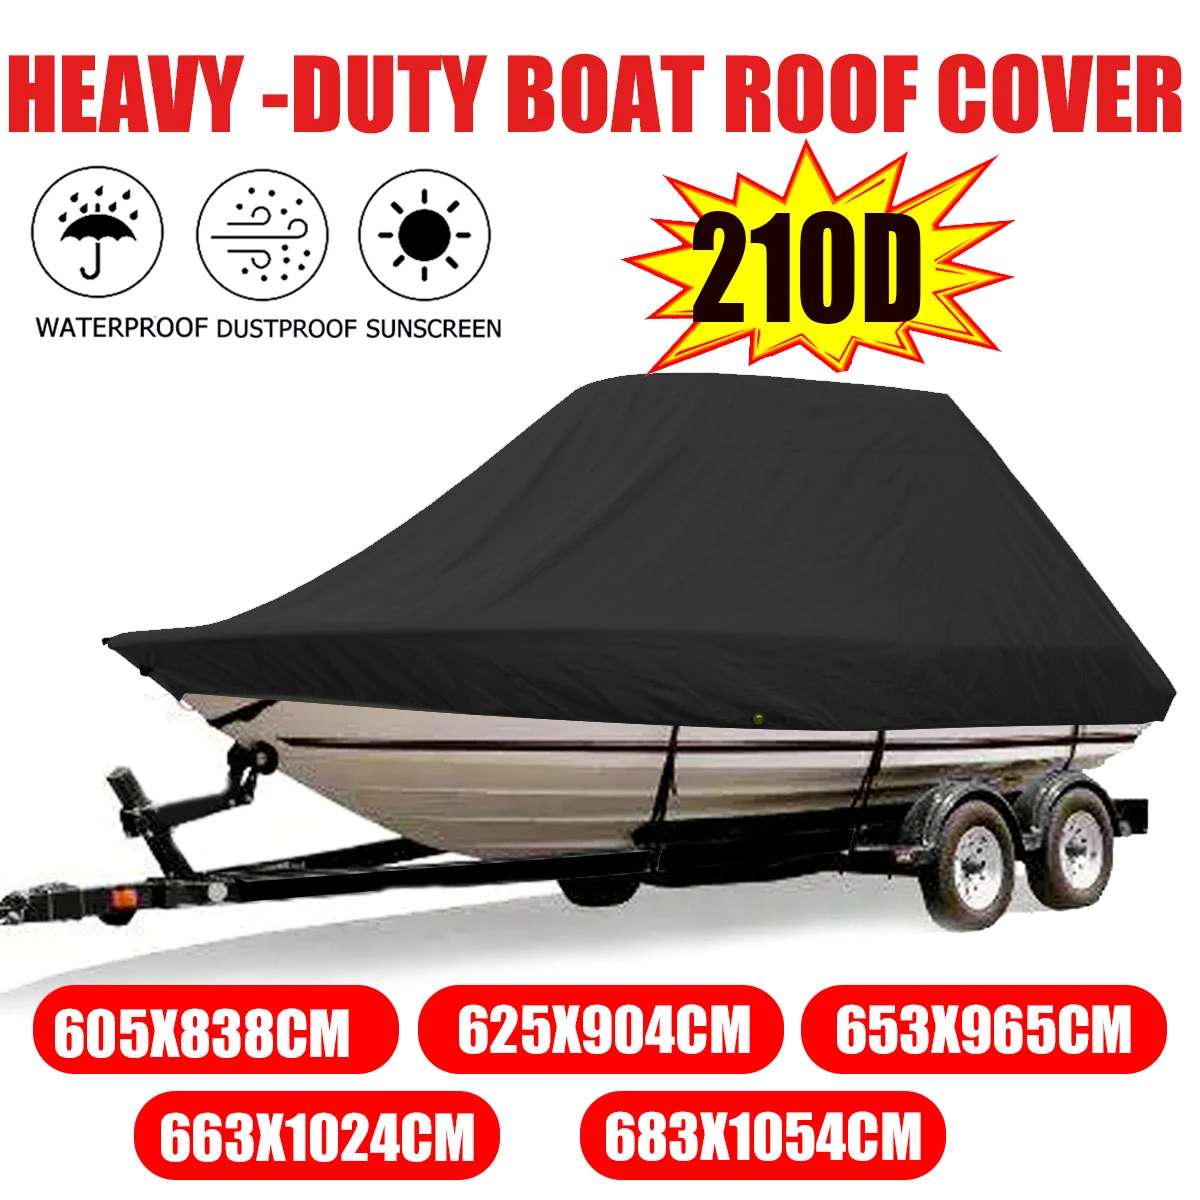 

210D Yacht Boat Cover Heavy Duty Trailer Marine 18-20-22-24-26-28Ft Barco Boat Cover Winter Snow Waterproof Sunshade